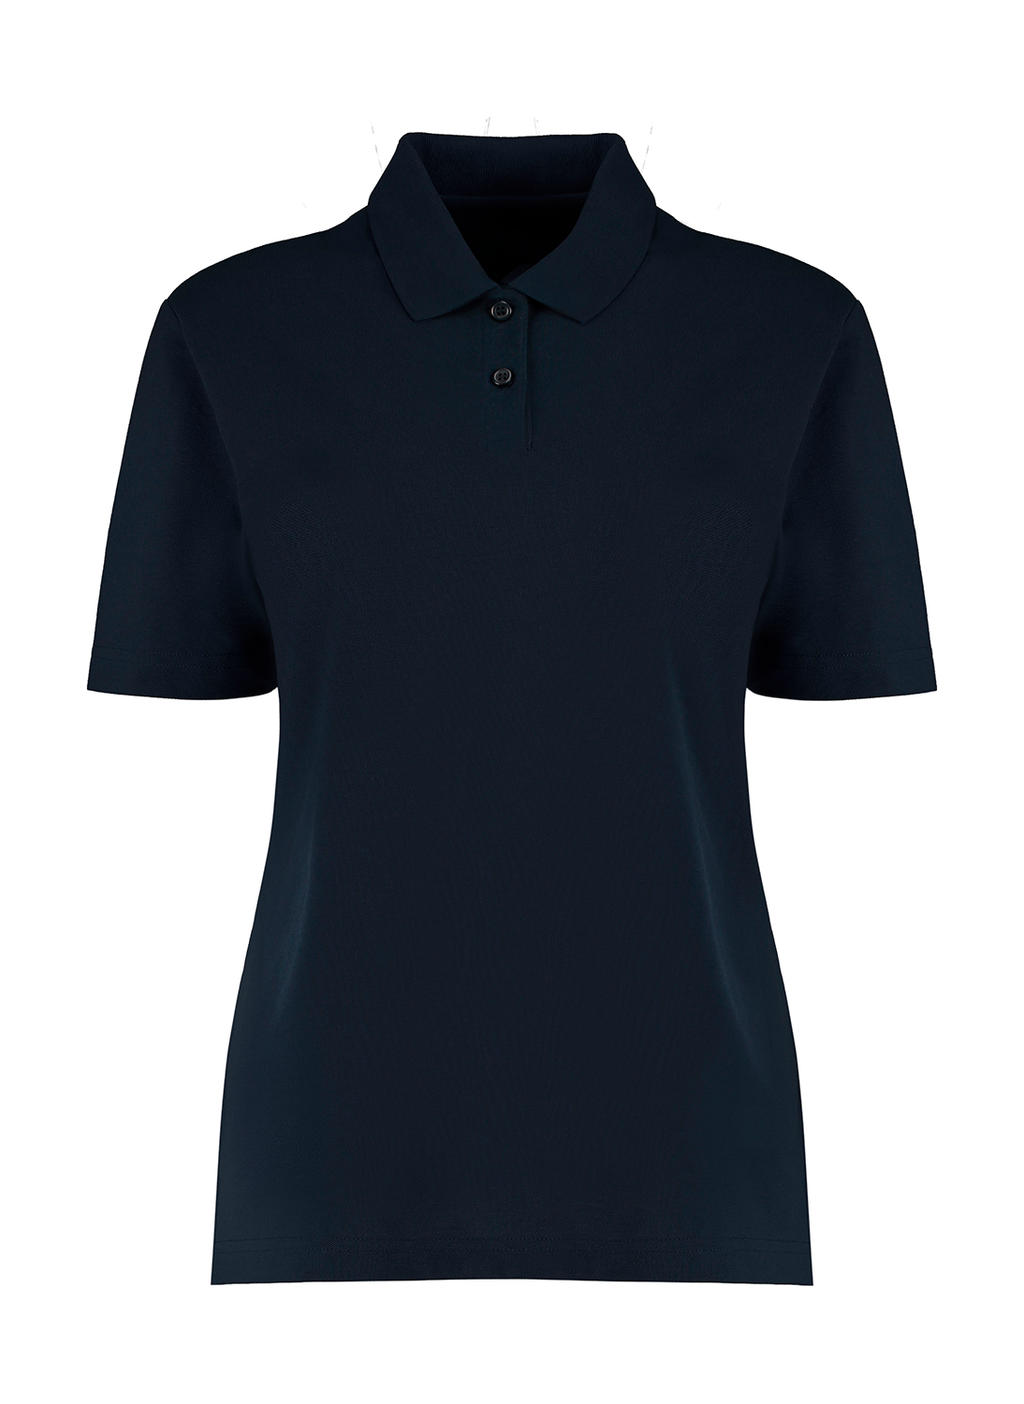  Womens Regular Fit Workforce Polo in Farbe Navy